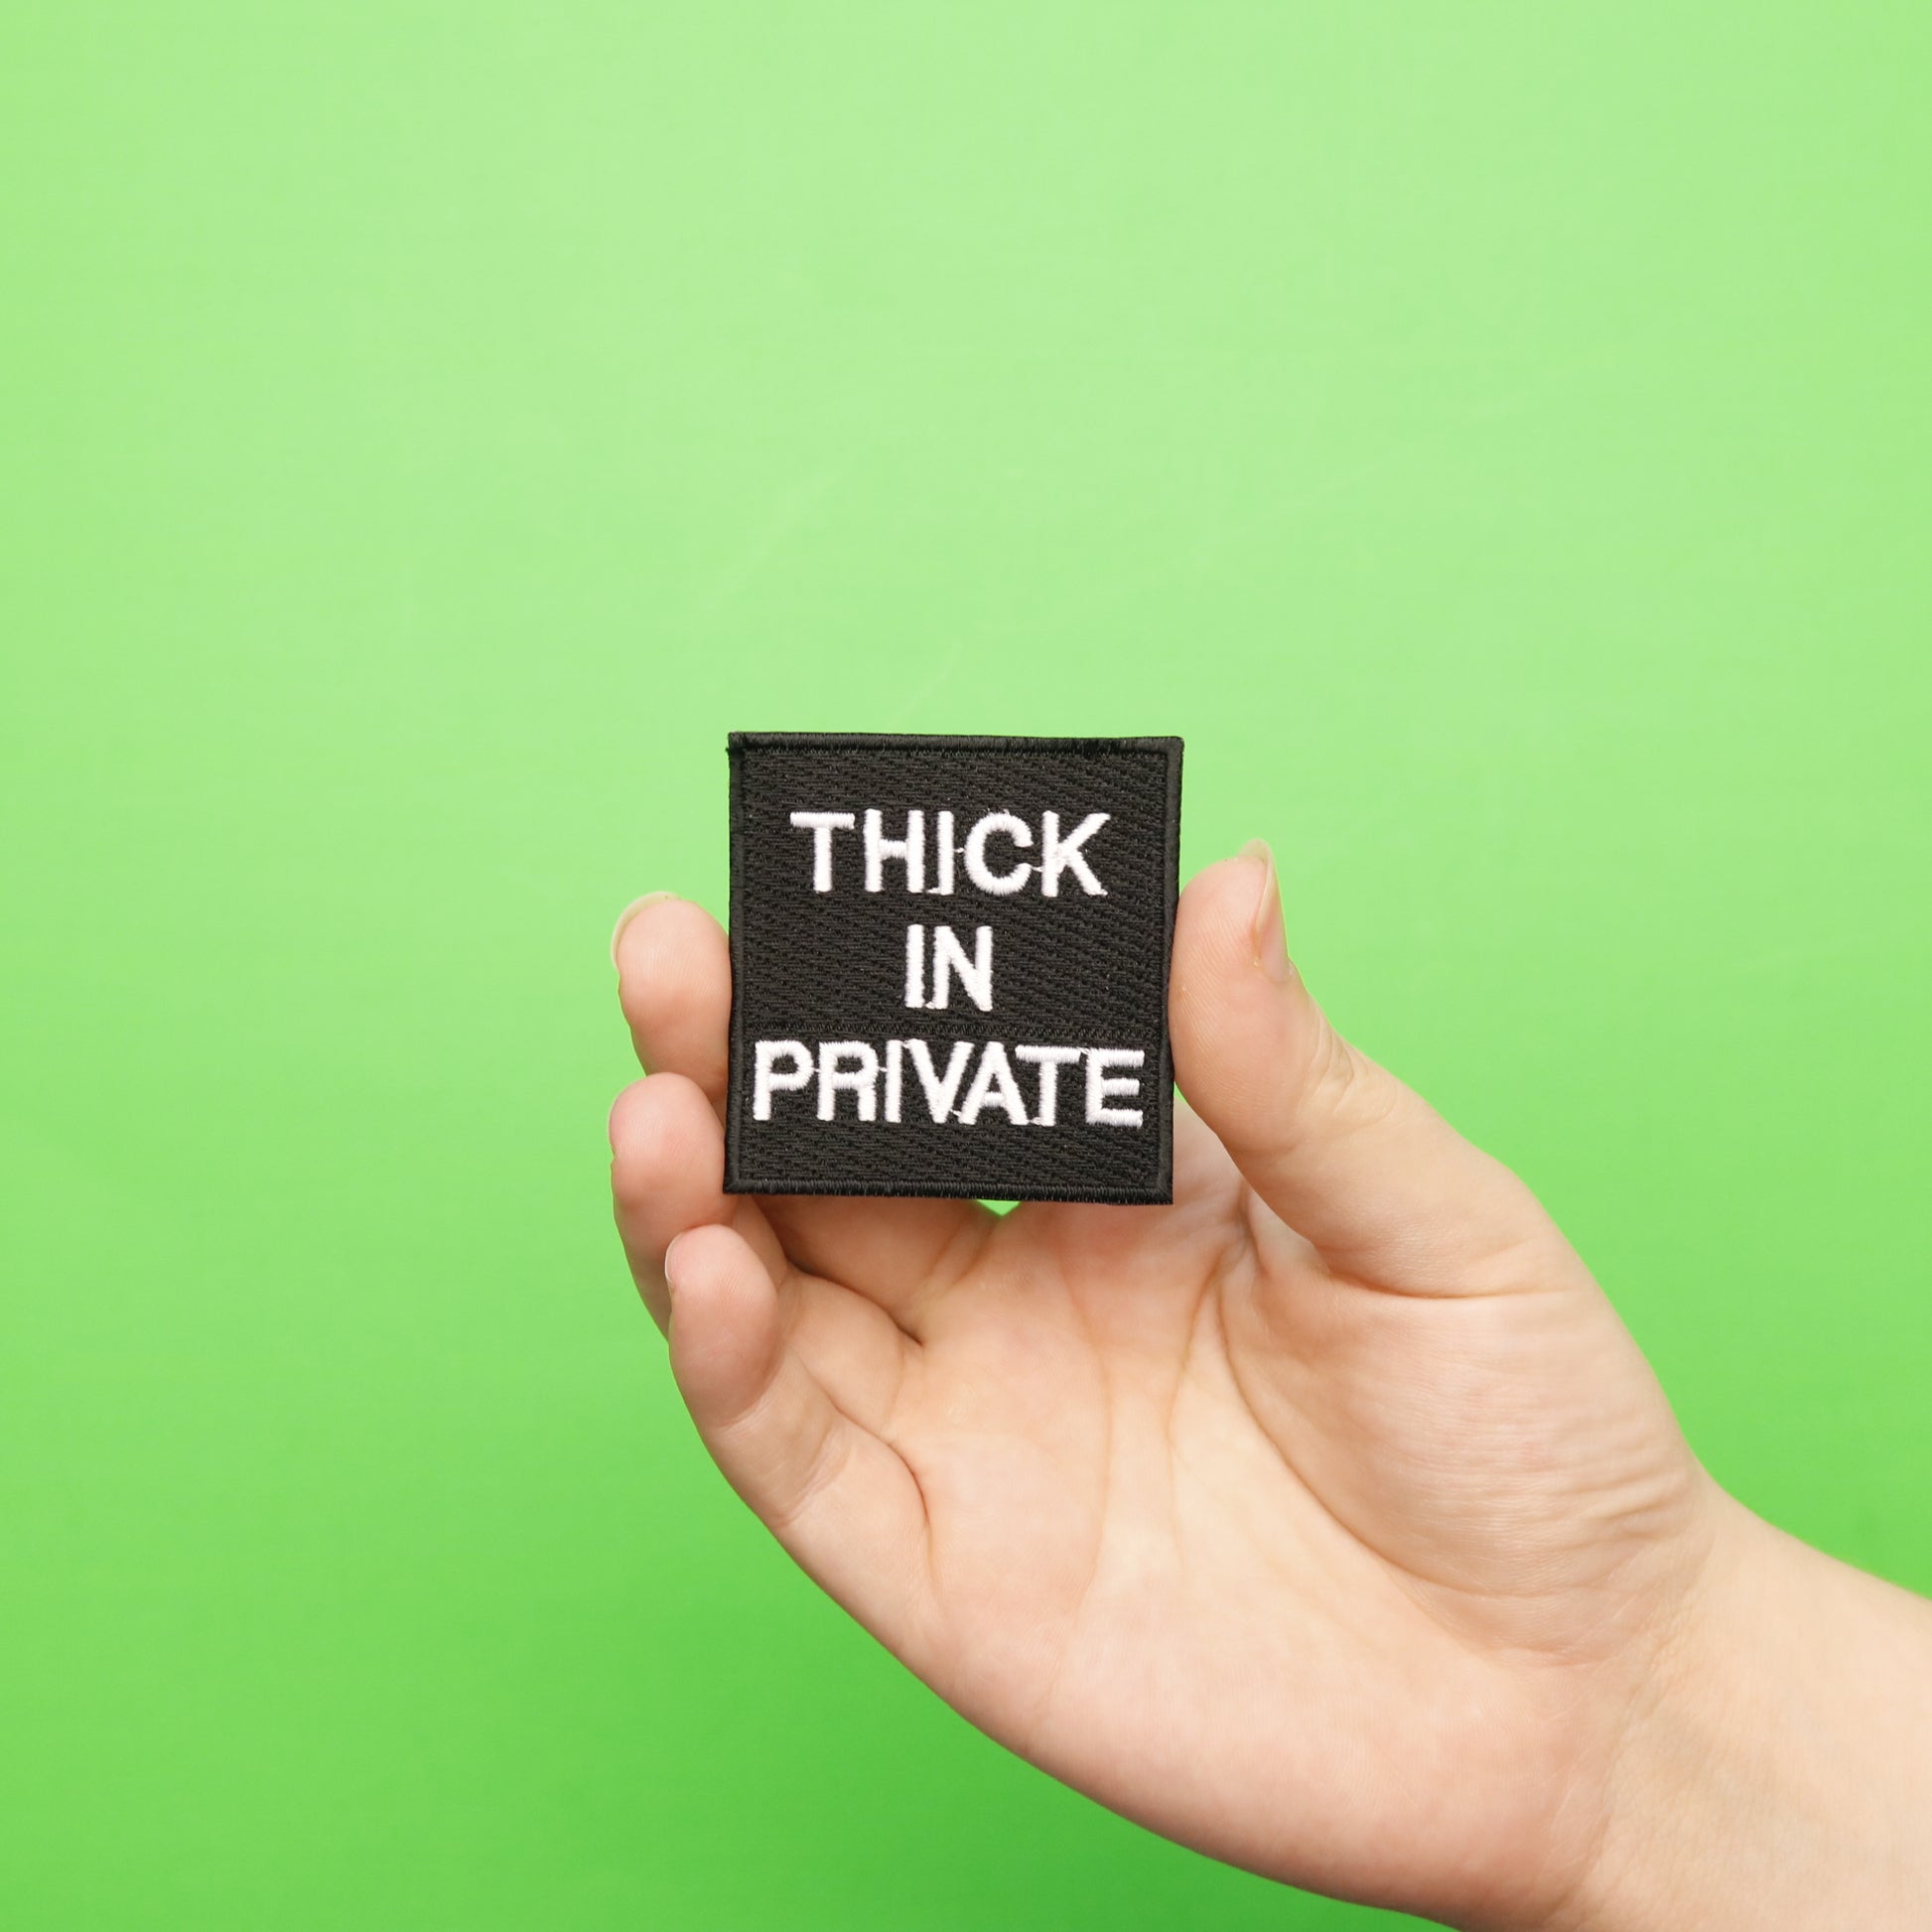 Thick In Private Box Embroidered Iron On Patch 